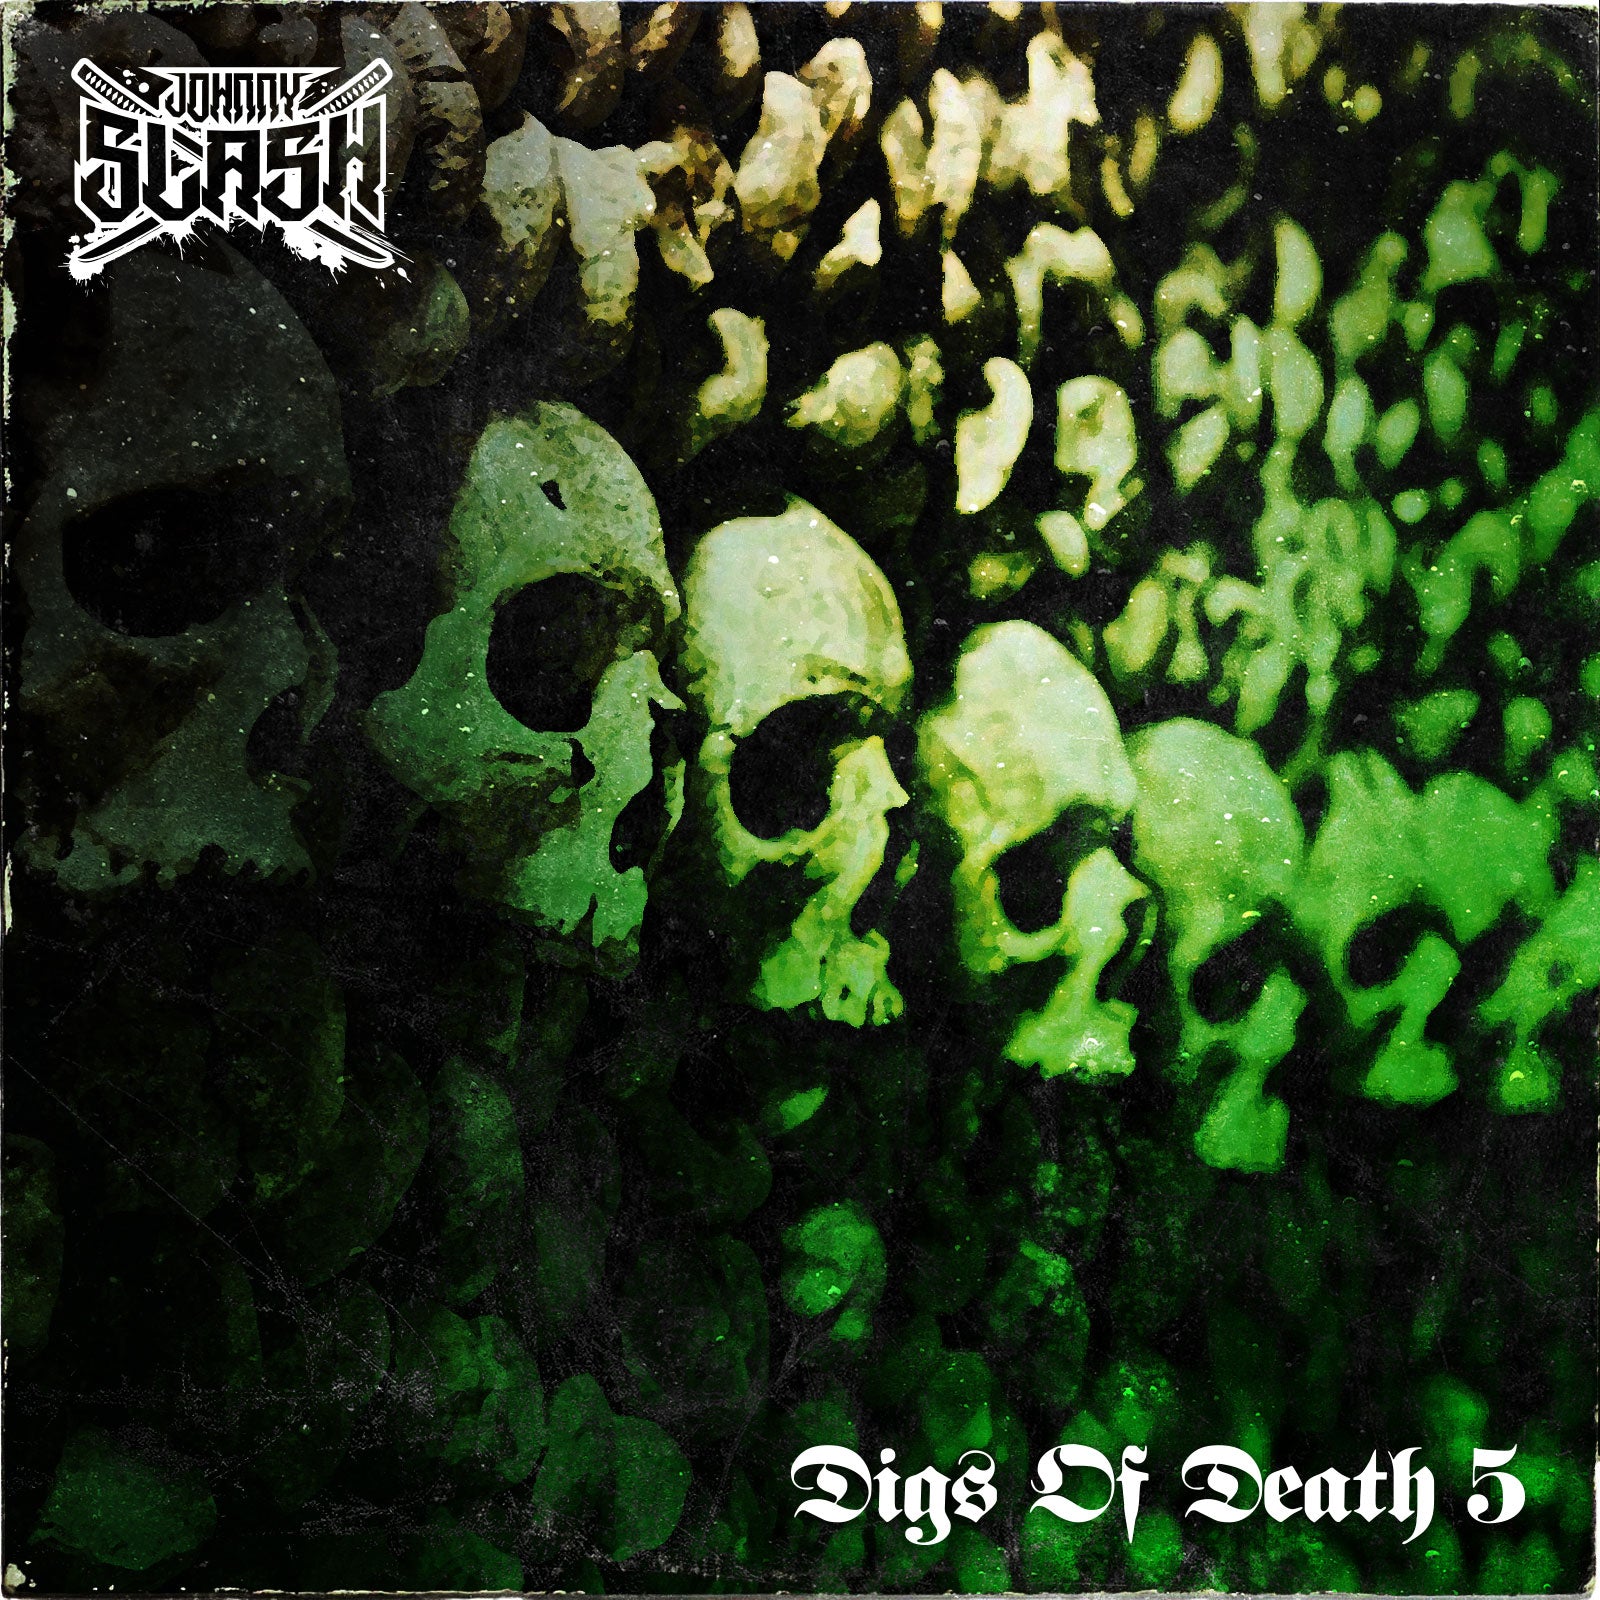 Digs of Death 5